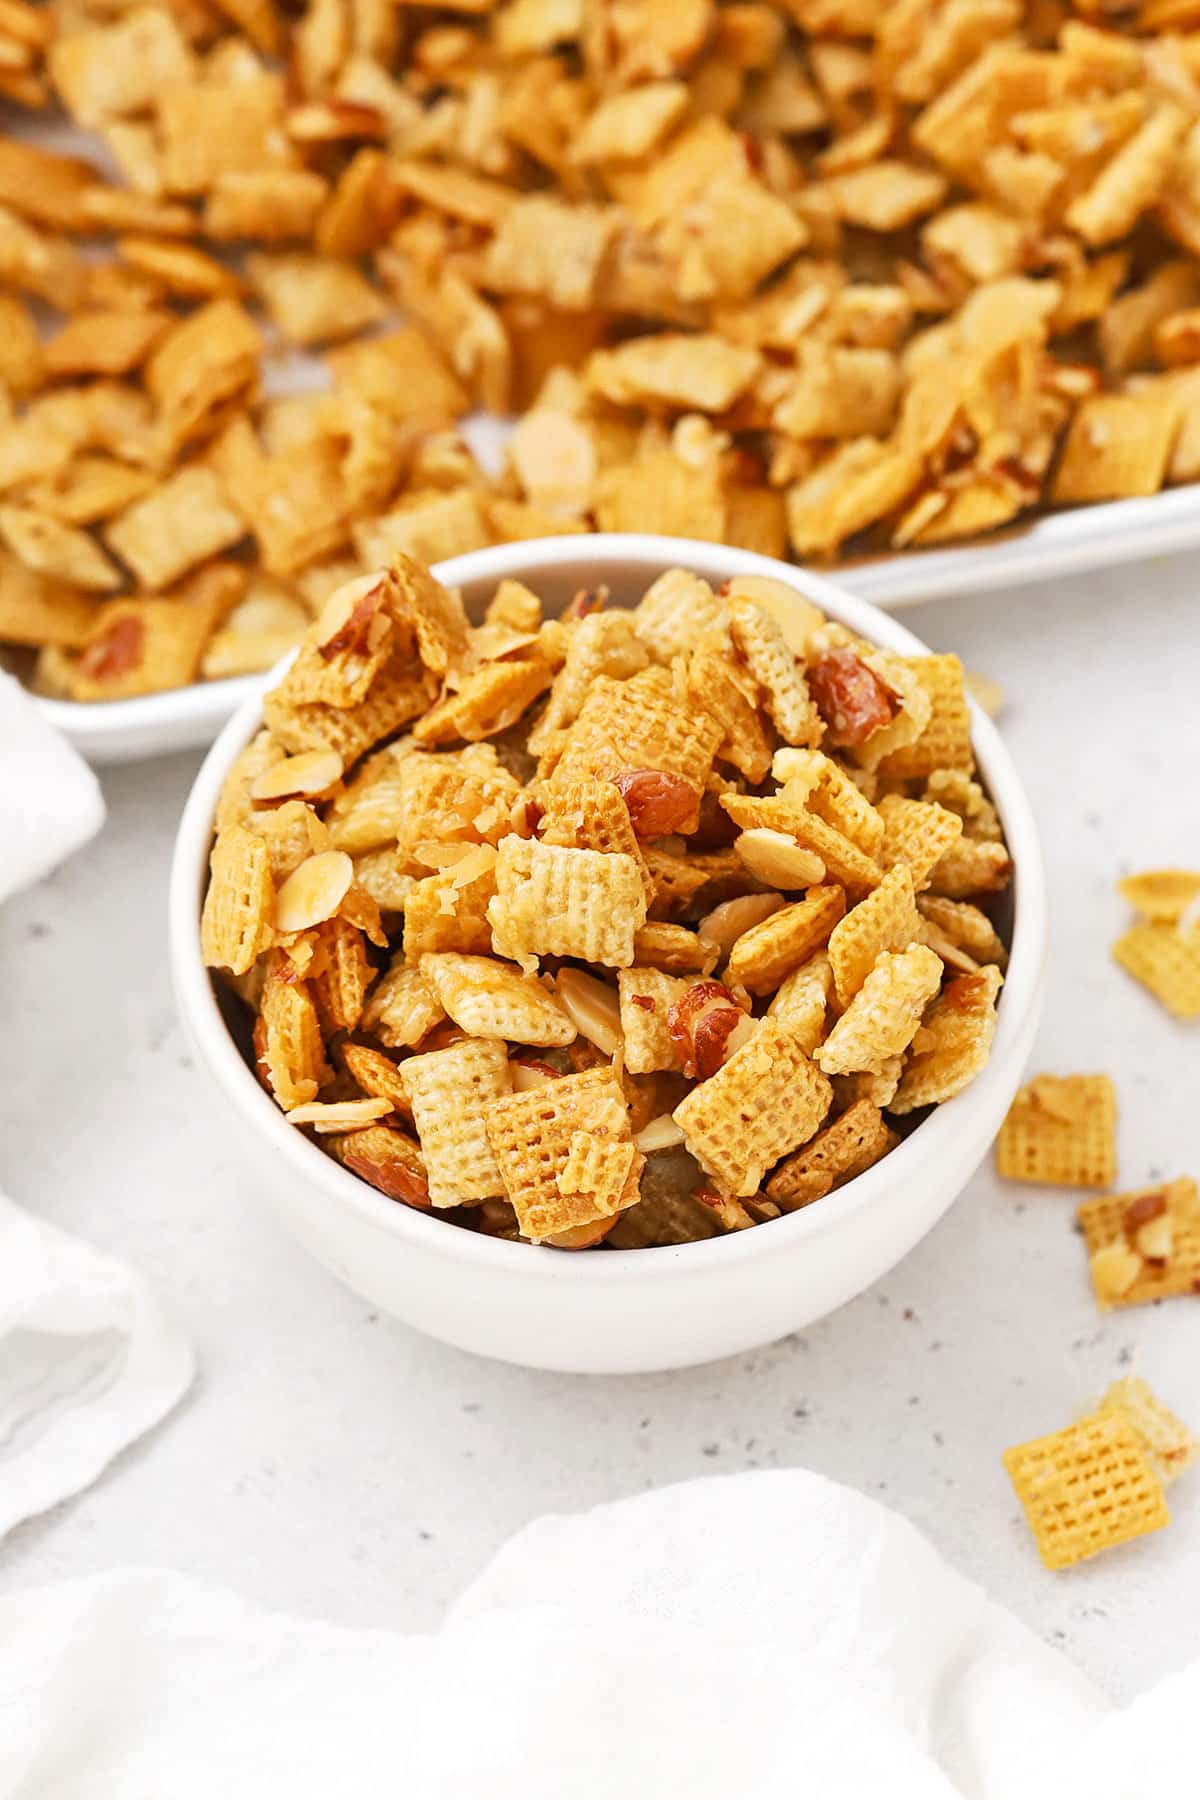 Let's make our Gluten-Free Sticky Chex Mix! This gooey coconut chex recipe has amazing flavor and is perfect for sharing with friends, neighbors, or party guests! / gluten-free coconut chex mix / gluten-free coconut almond chex mix / sticky holiday chex mix / is gooey chex mix gluten-free / gluten-free holiday treat / gluten-free sweet chex mix recipe